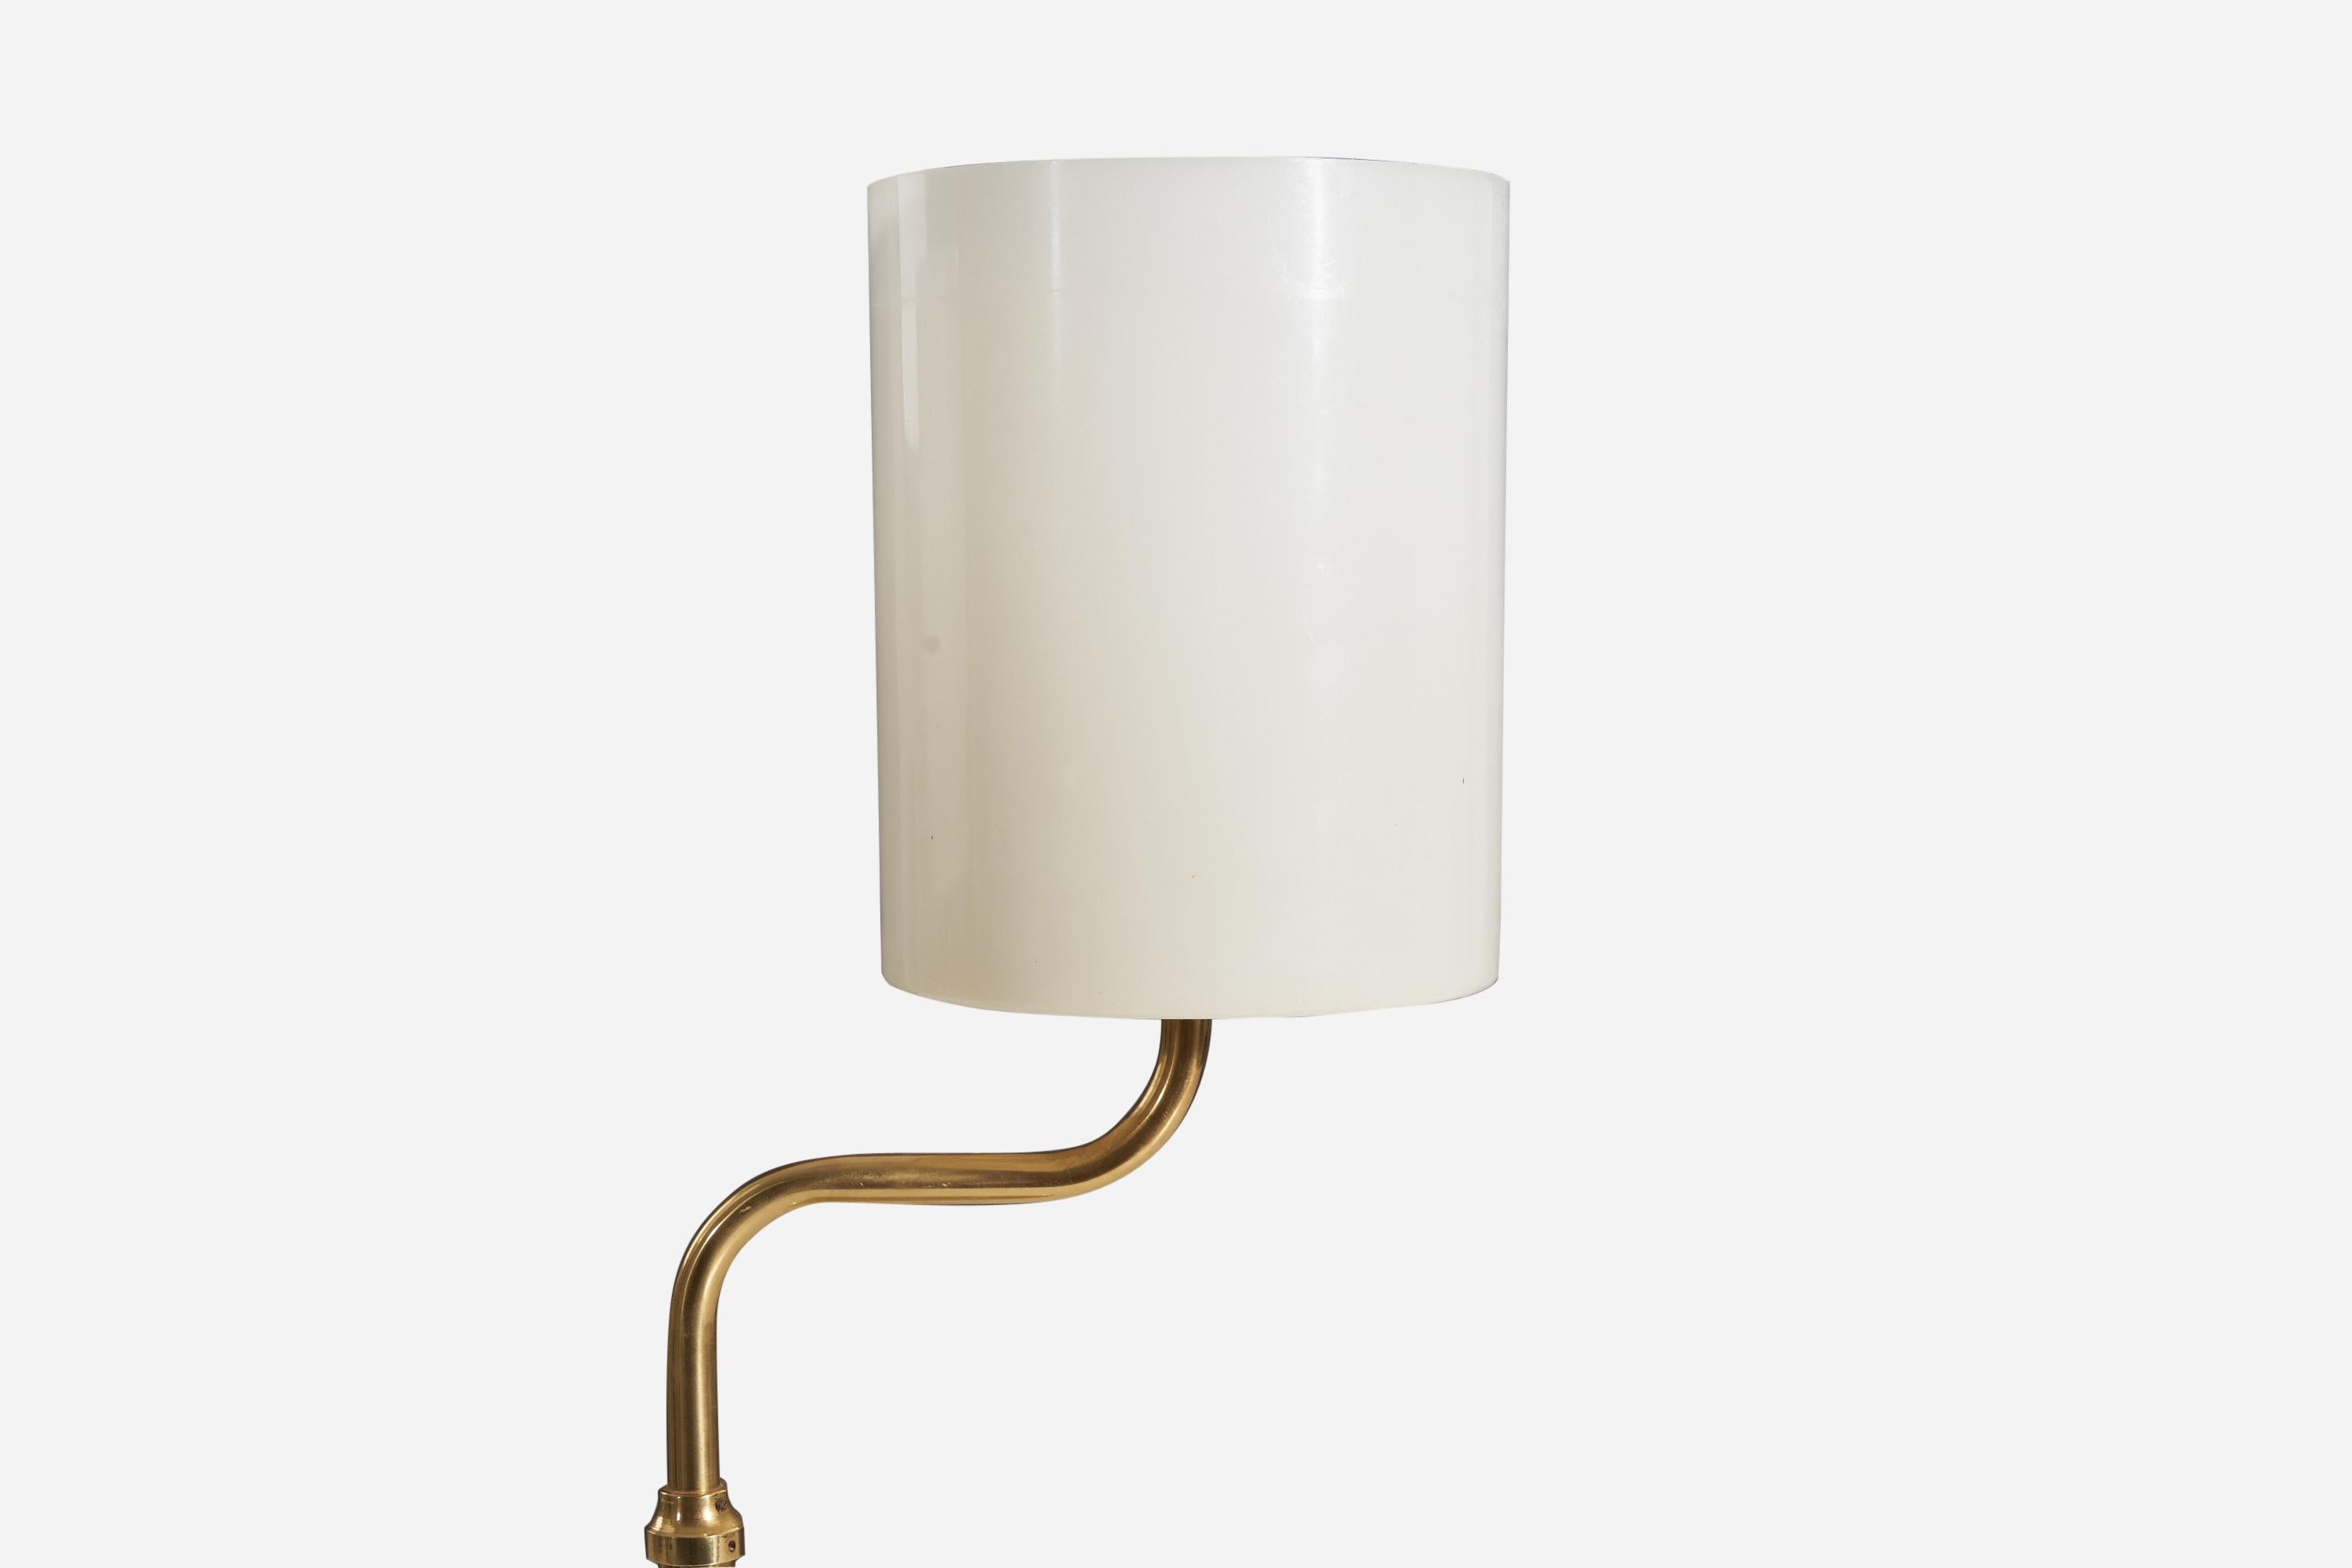 Mid-20th Century Swedish Designer, Table Lamps, Brass, Acrylic, Sweden, 1960s For Sale